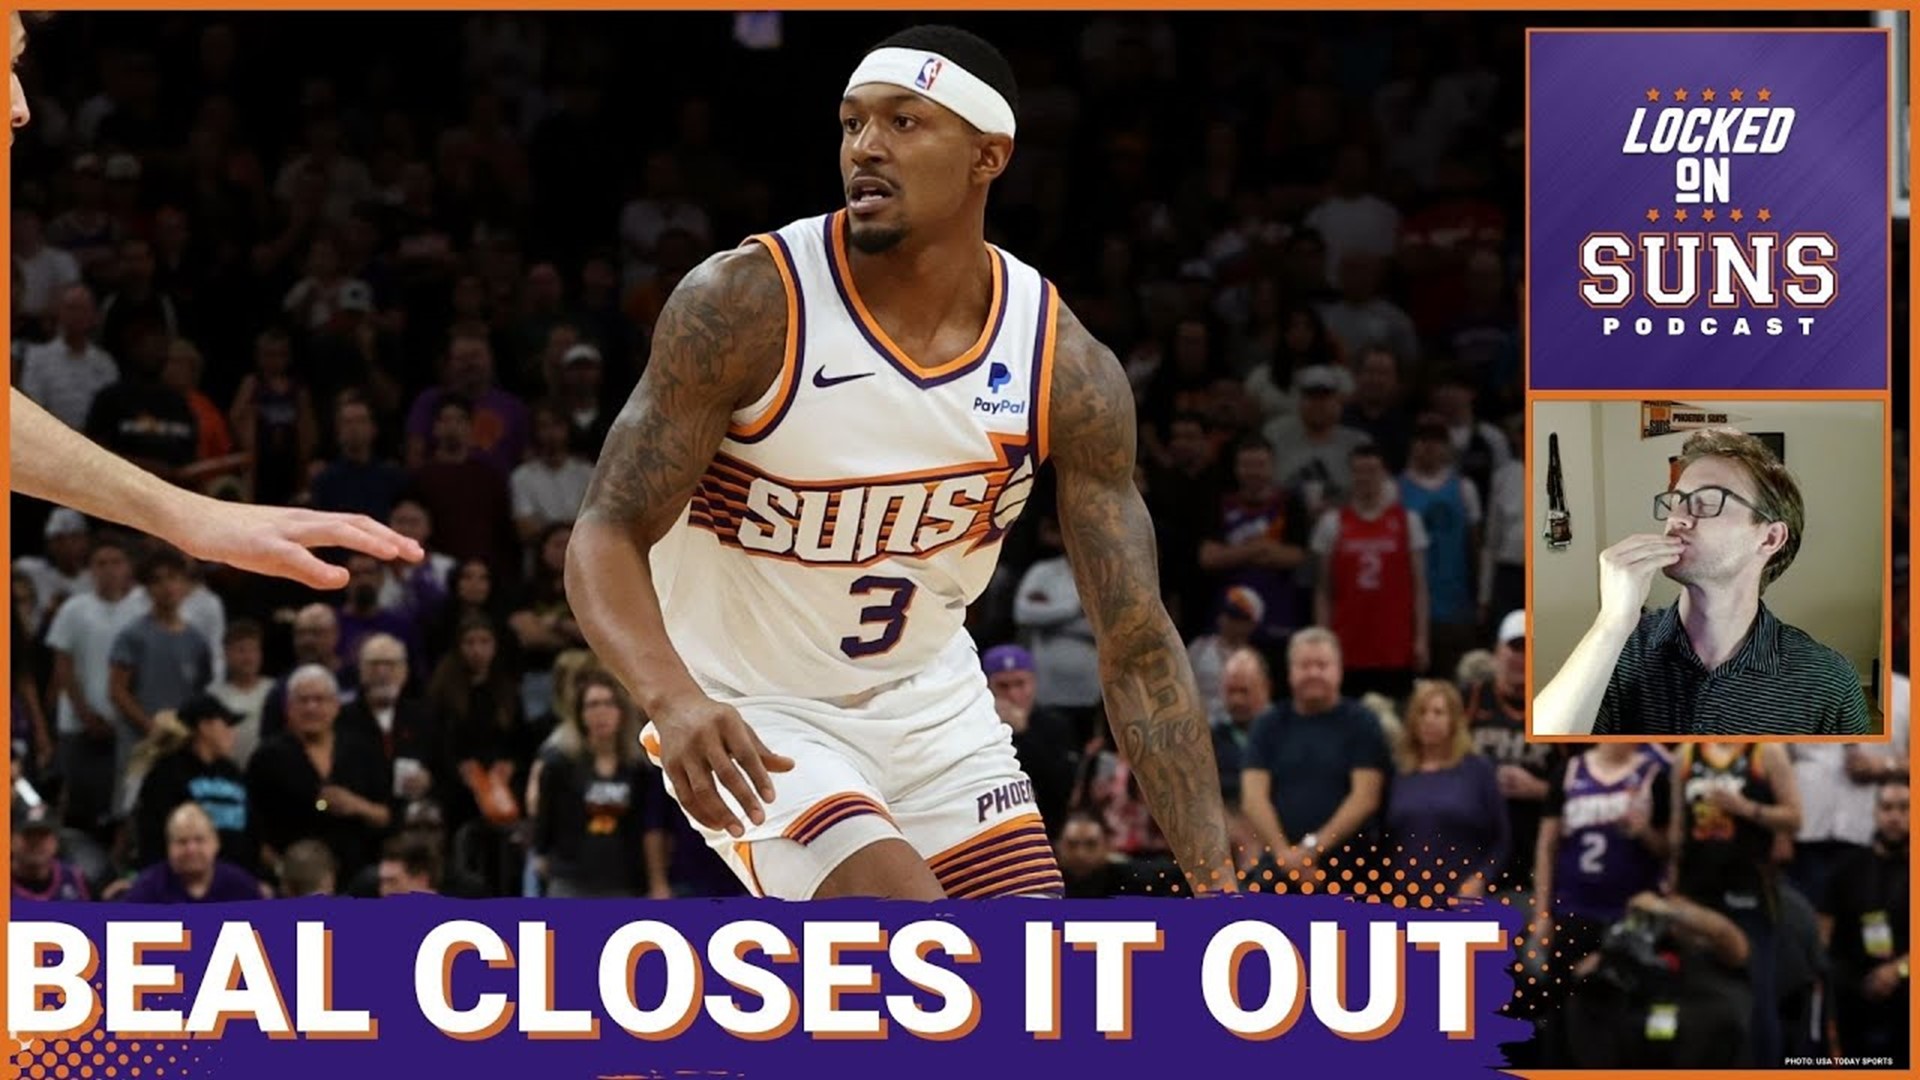 Bradley Beal helped land the plane for the Phoenix Suns in the fourth quarter as Kevin Durant rested, while Grayson Allen went off once again in a win over Toronto.